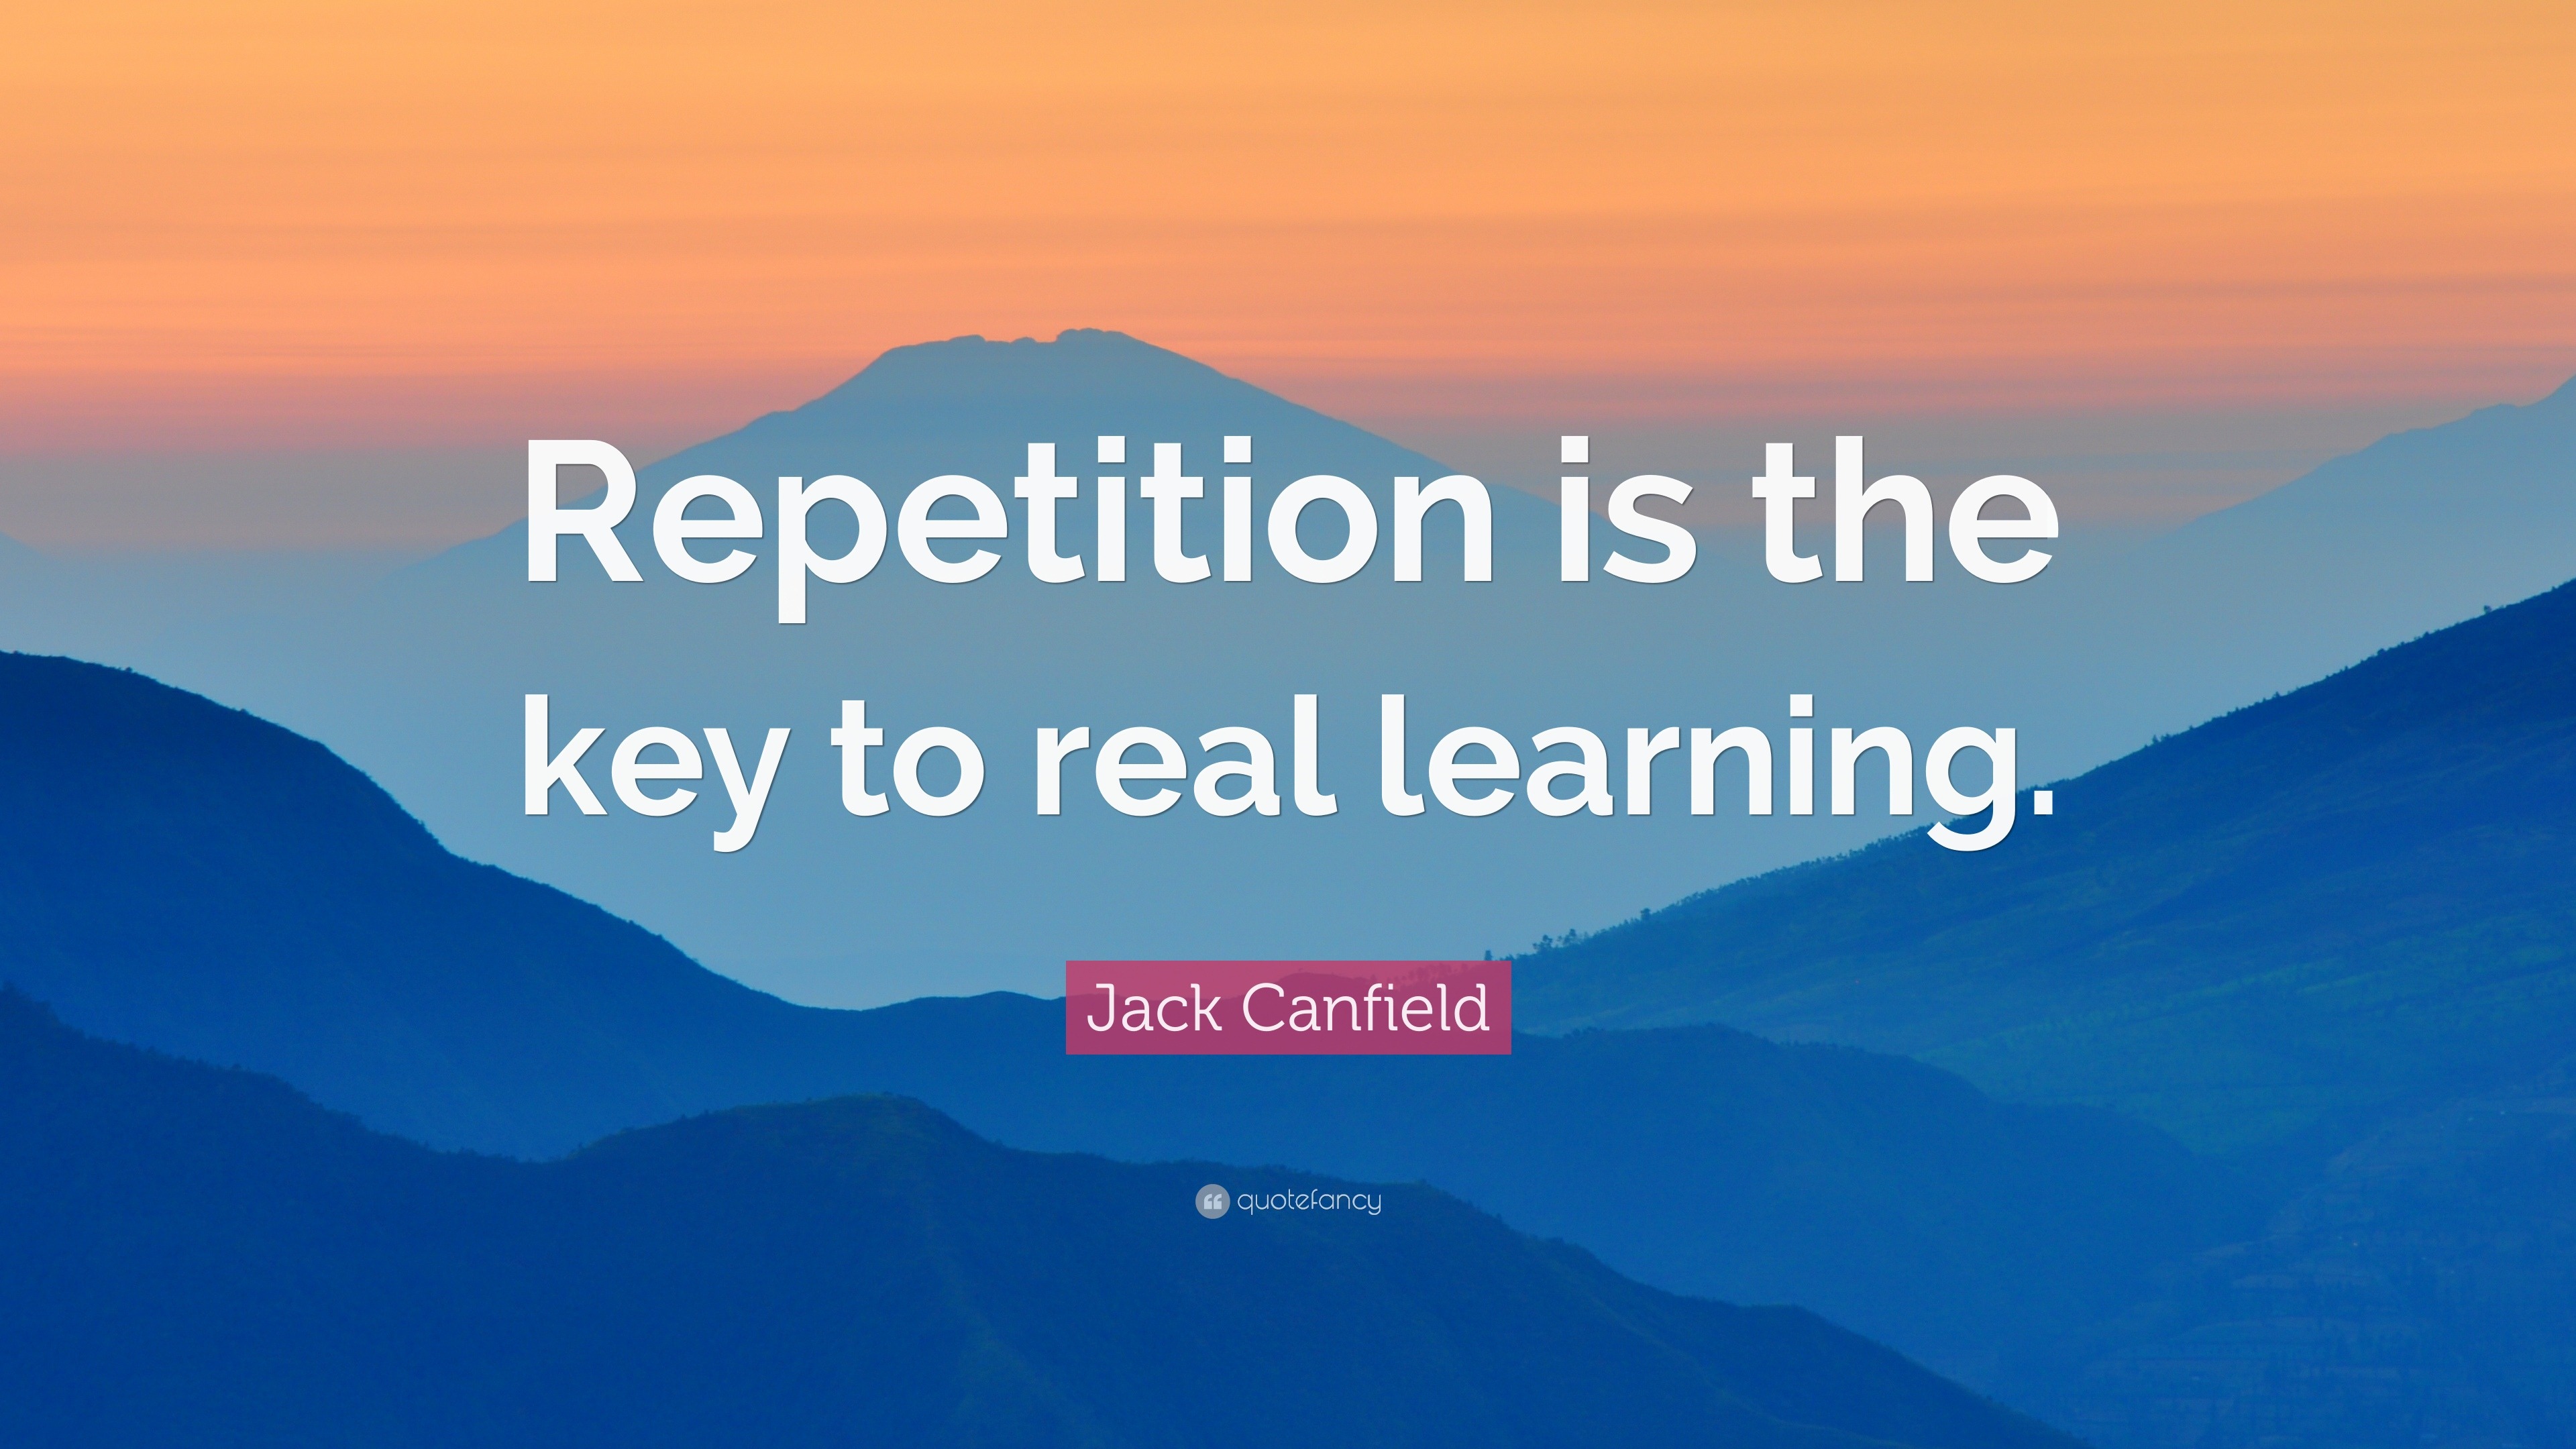 Jack Canfield Quote: "Repetition is the key to real learning." (12 wallpapers) - Quotefancy